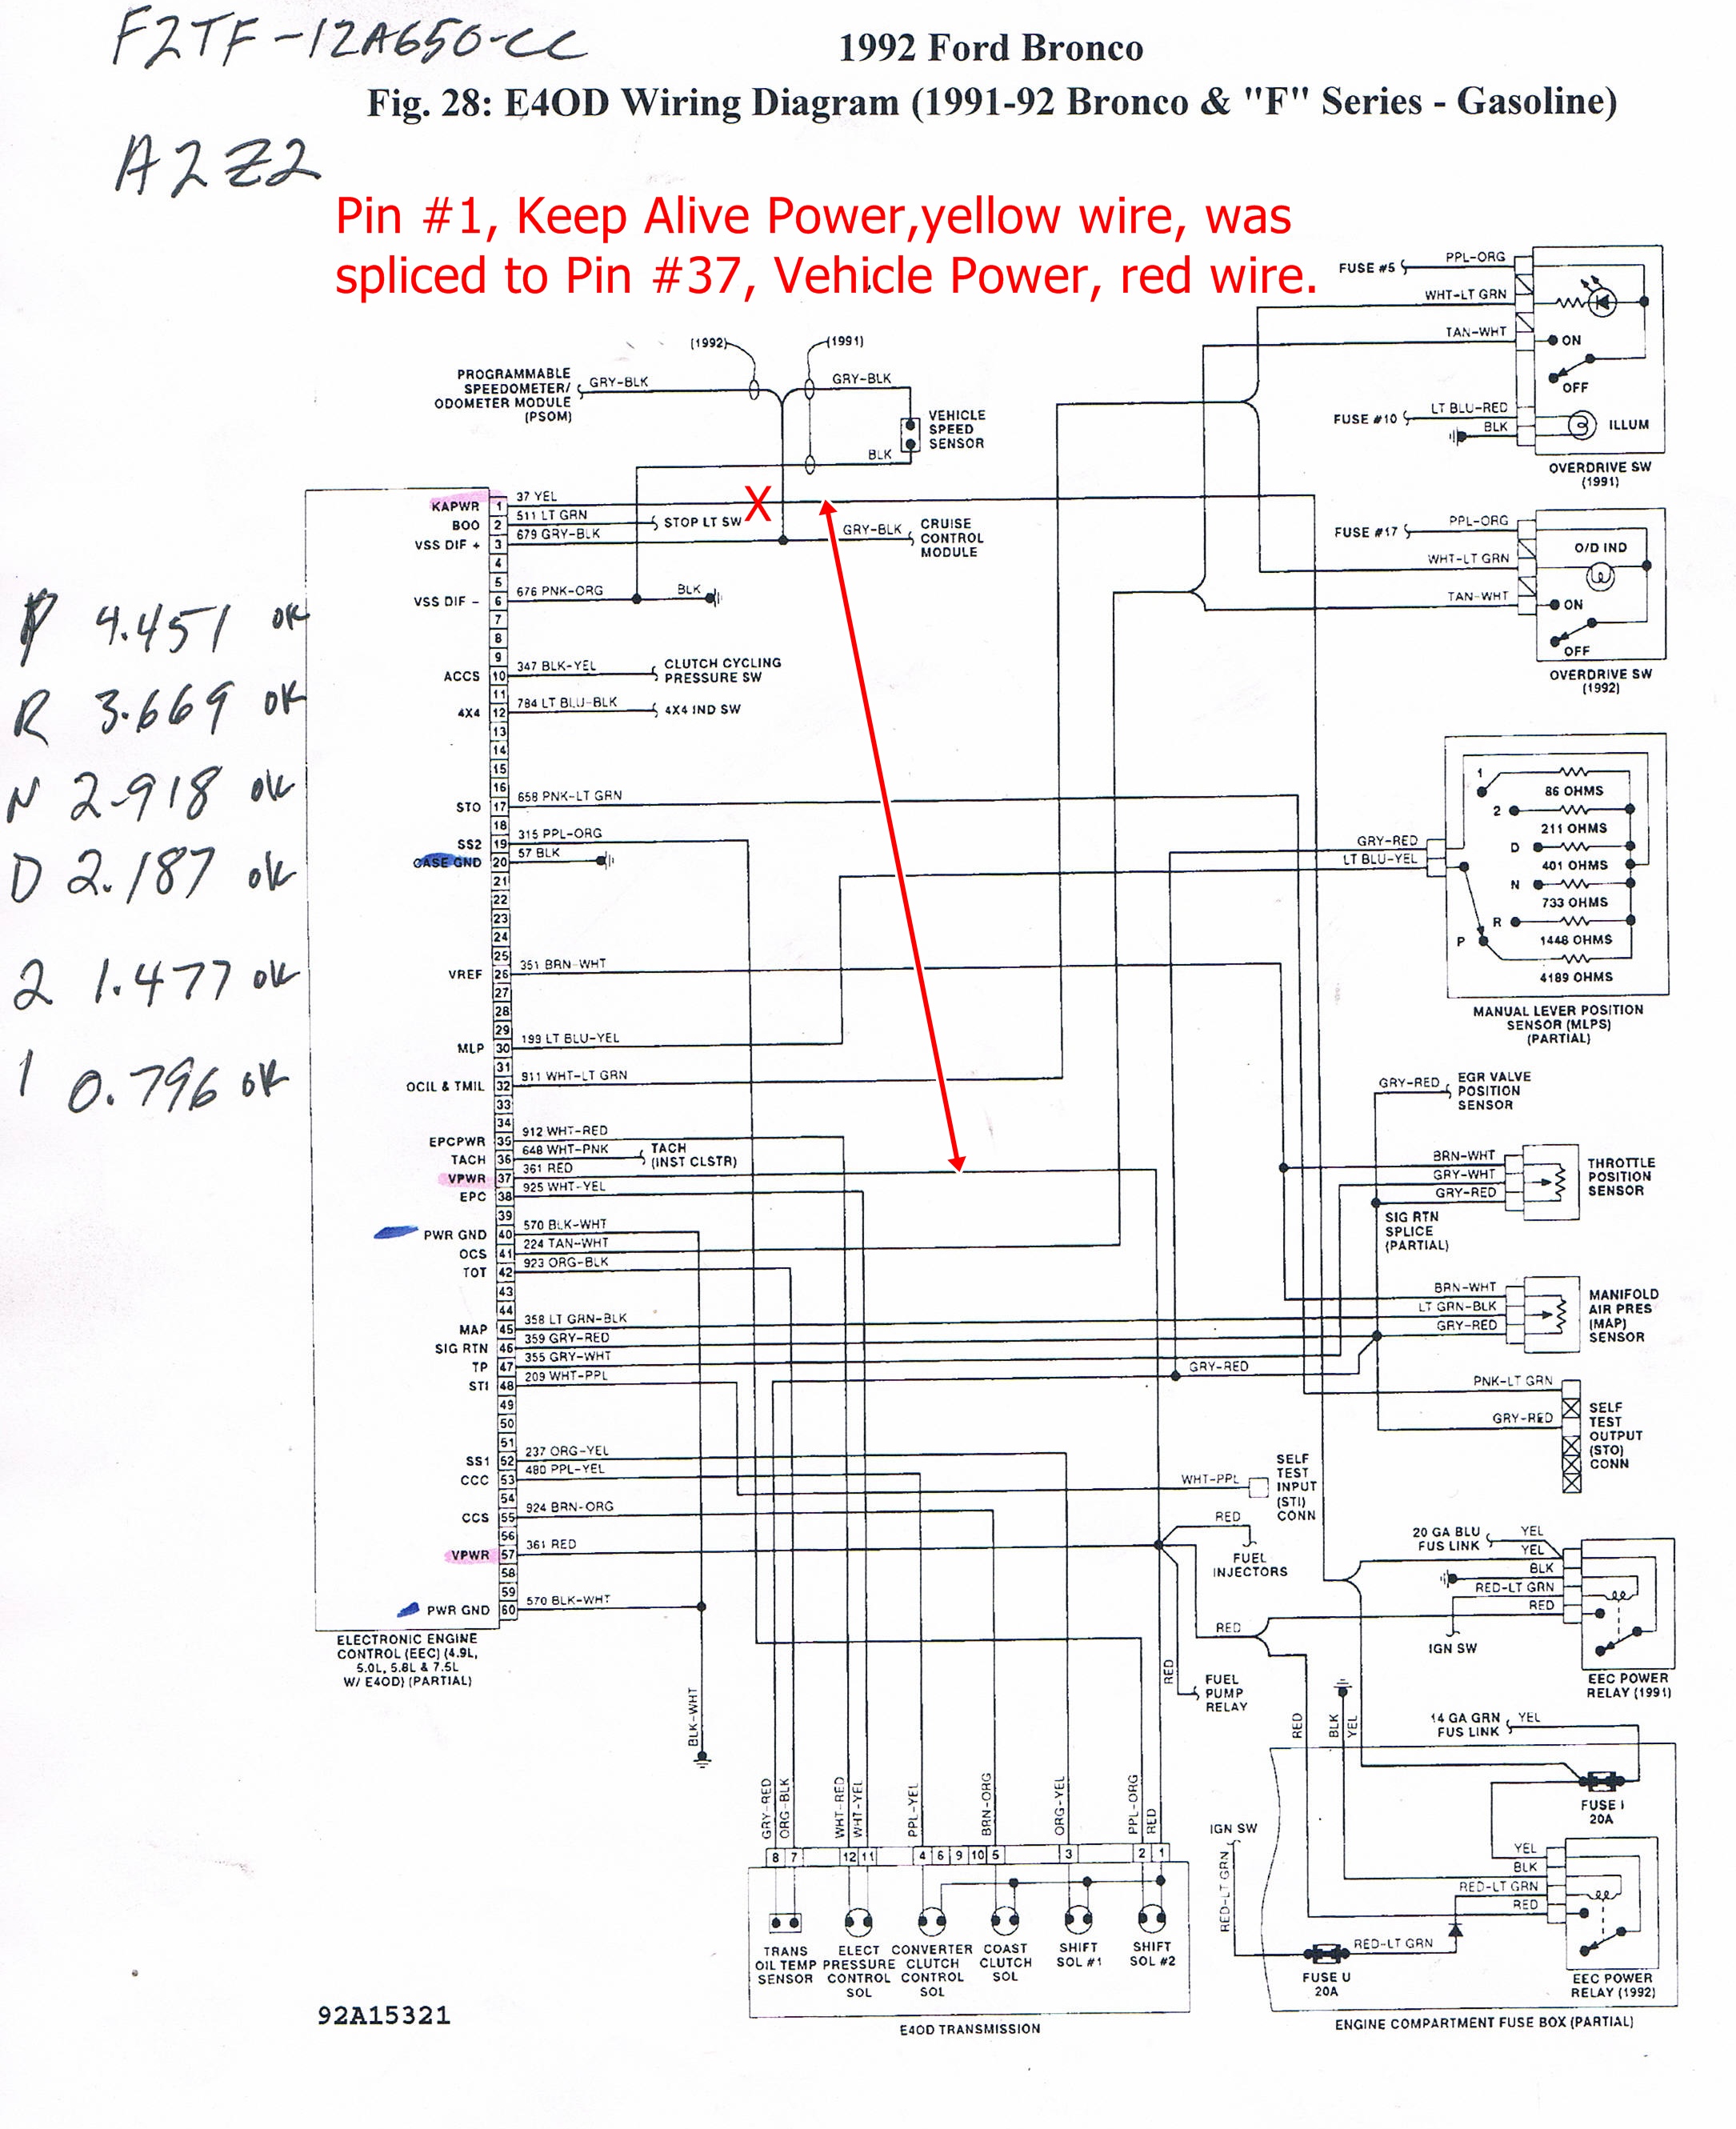 is250 amp wiring diagram